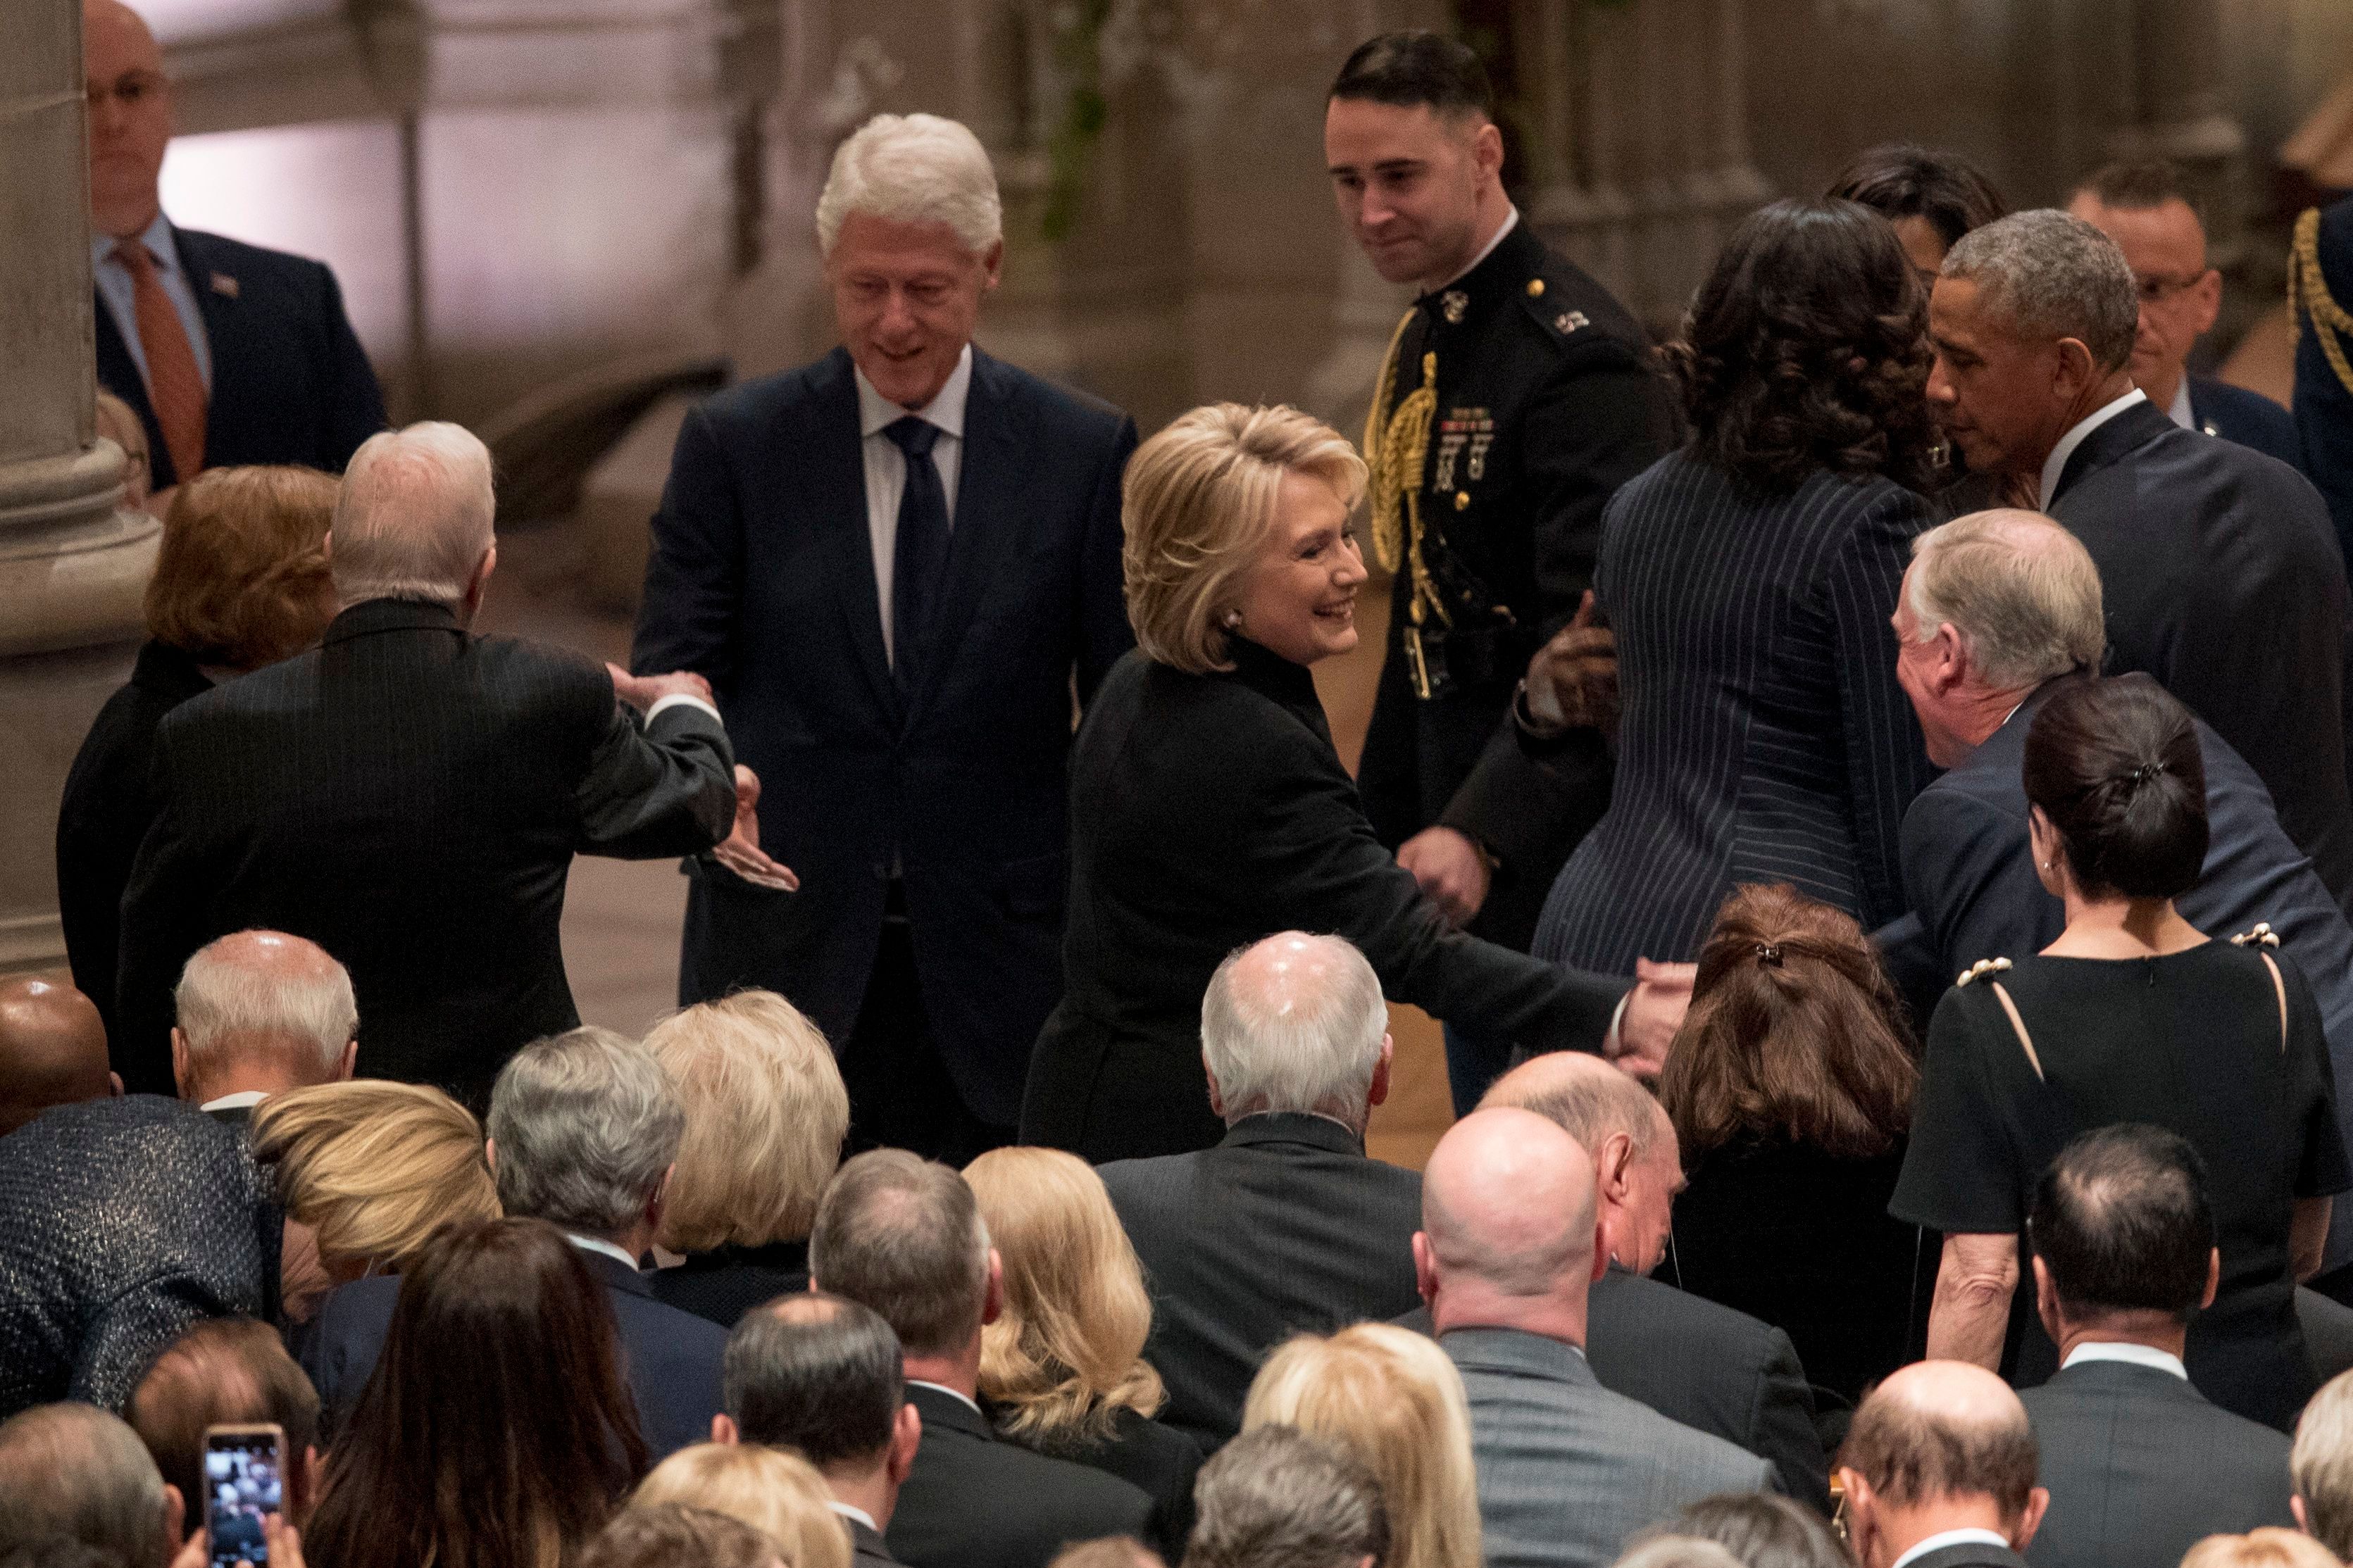 Former President Jimmy Carter, and former first lady Rosalynn Carter, greet former President Bill Clinton, as his wife, former Secretary of State Hillary Clinton, greets a guest before a State Funeral for former President George H.W. Bush at the National Cathedral, in Washington, DC on Dec. 5, 2018. (Andrew Harnik/Pool/EPA—EFE/REX/Shutterstock)